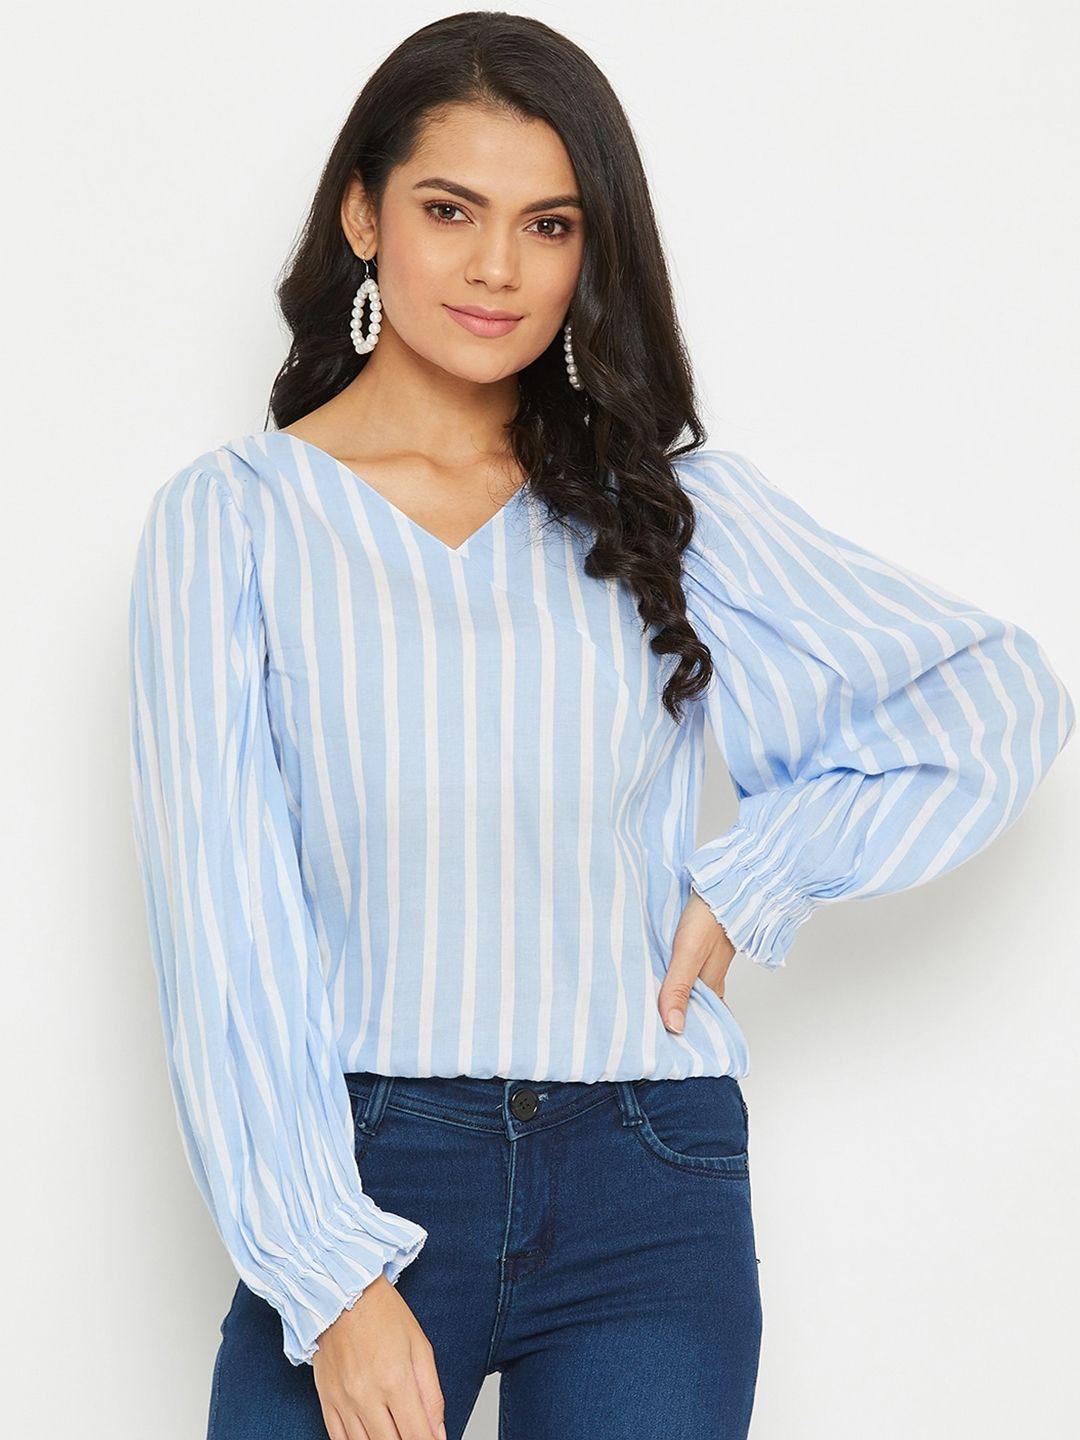 panit striped v-neck puff sleeves top